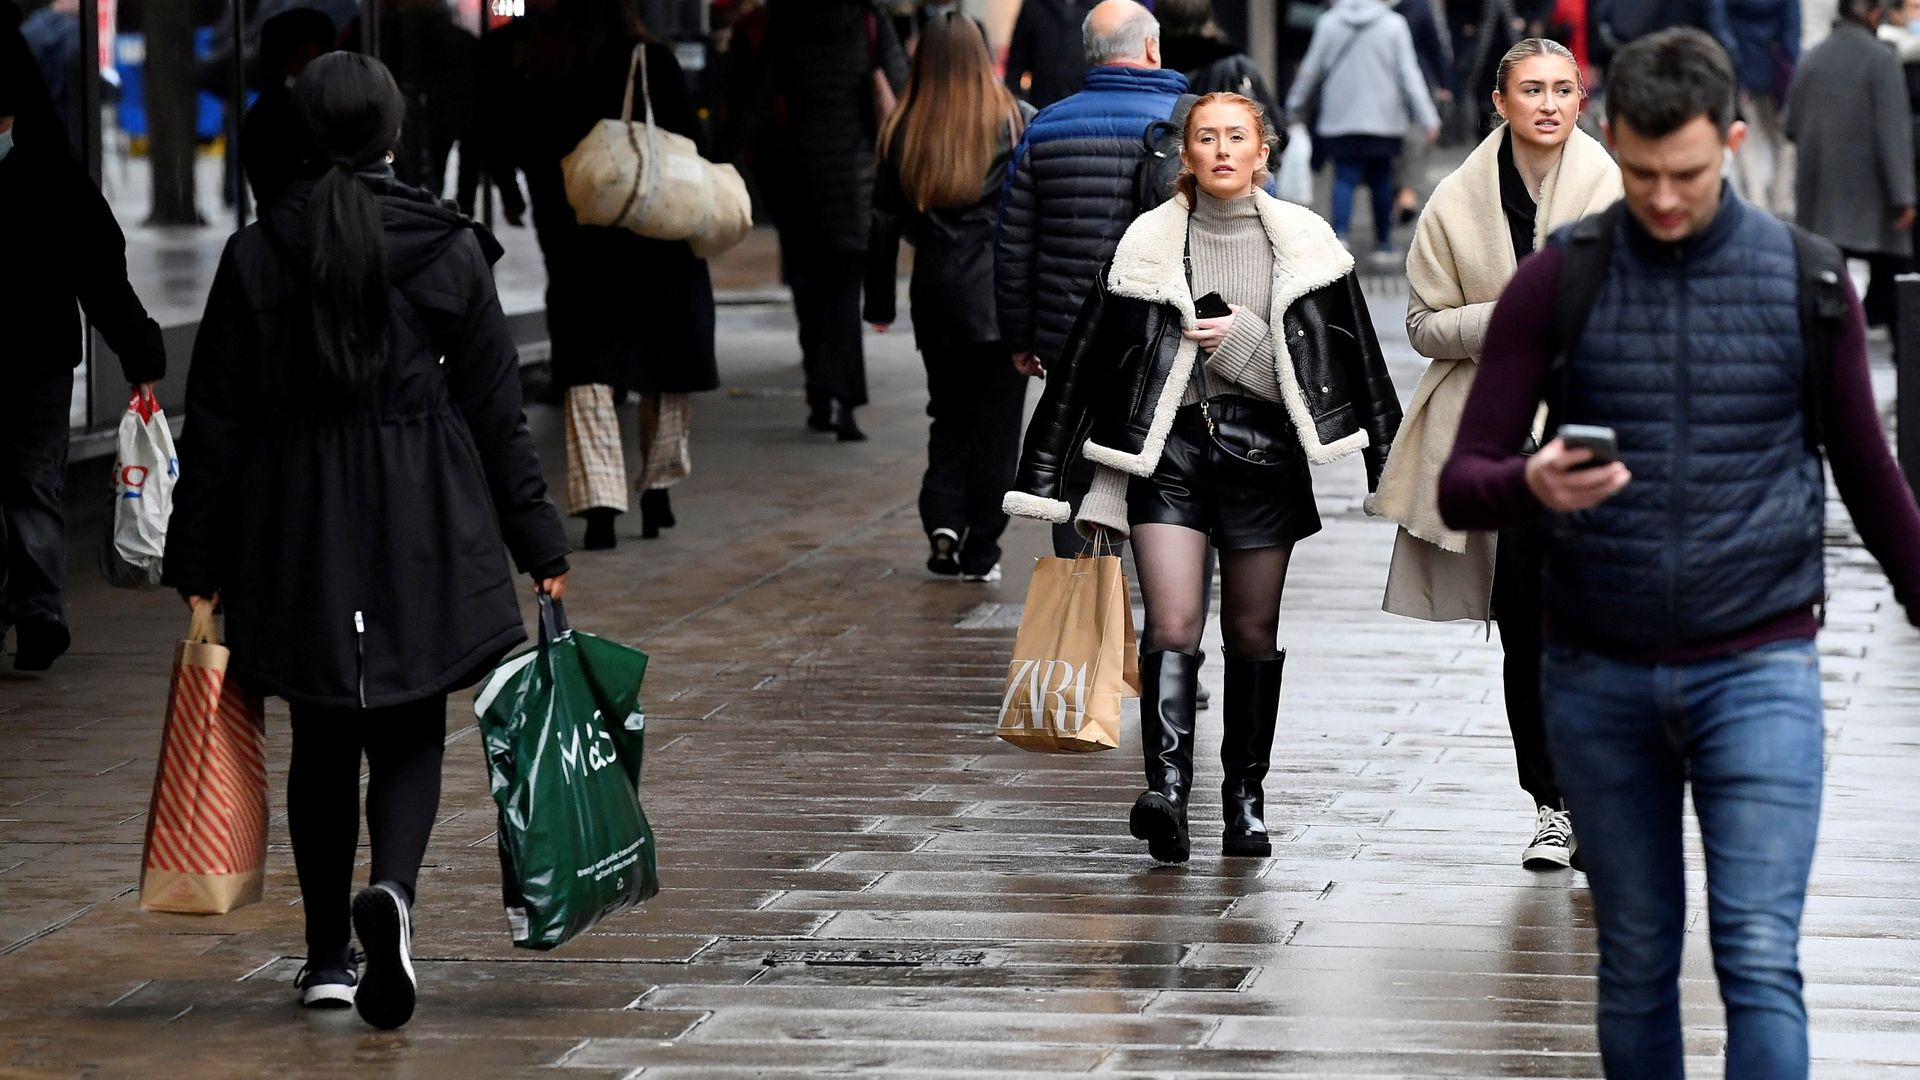 Retail sales show zero growth despite 'fresh two-year high' for consumer confidence